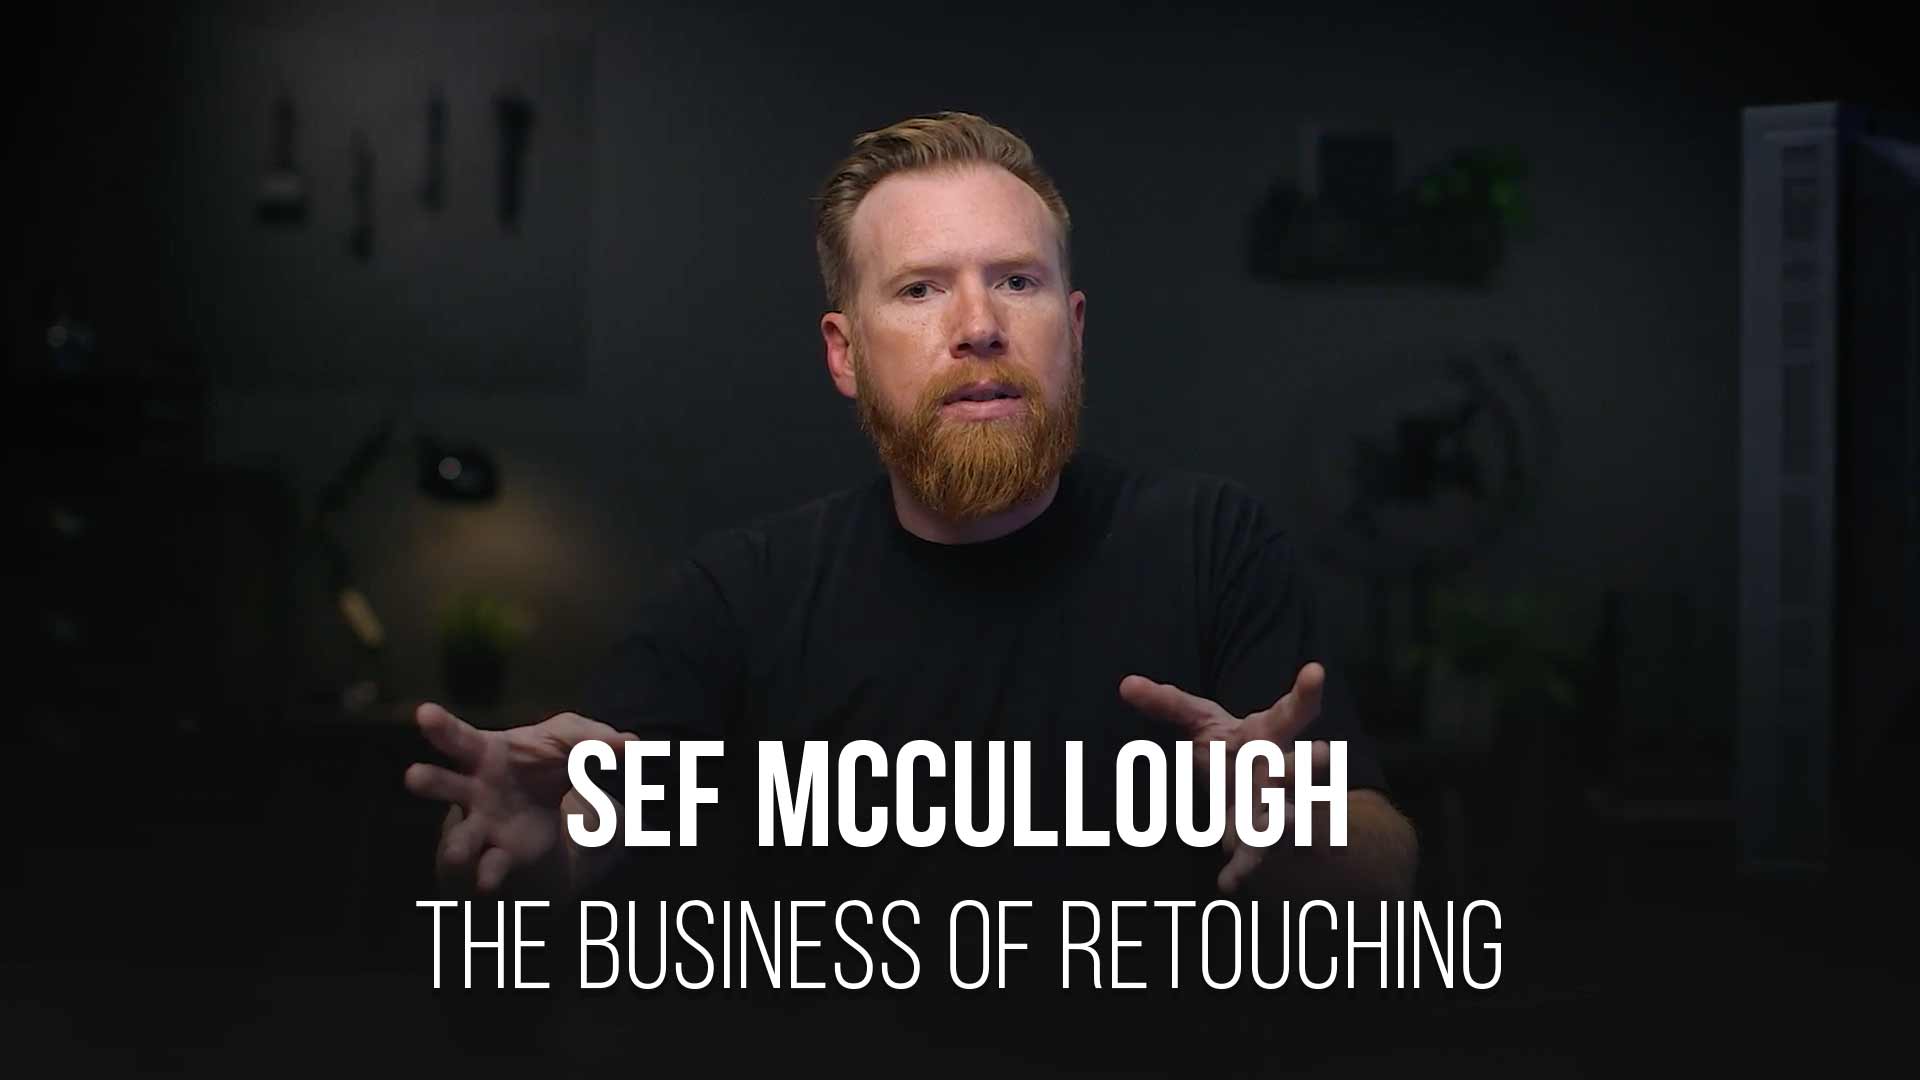 Sef McCullough is a master commercial retoucher and is teaching the business of retouching in this course. He is a PRO EDU instructor and a professional Adobe Photoshop retoucher.